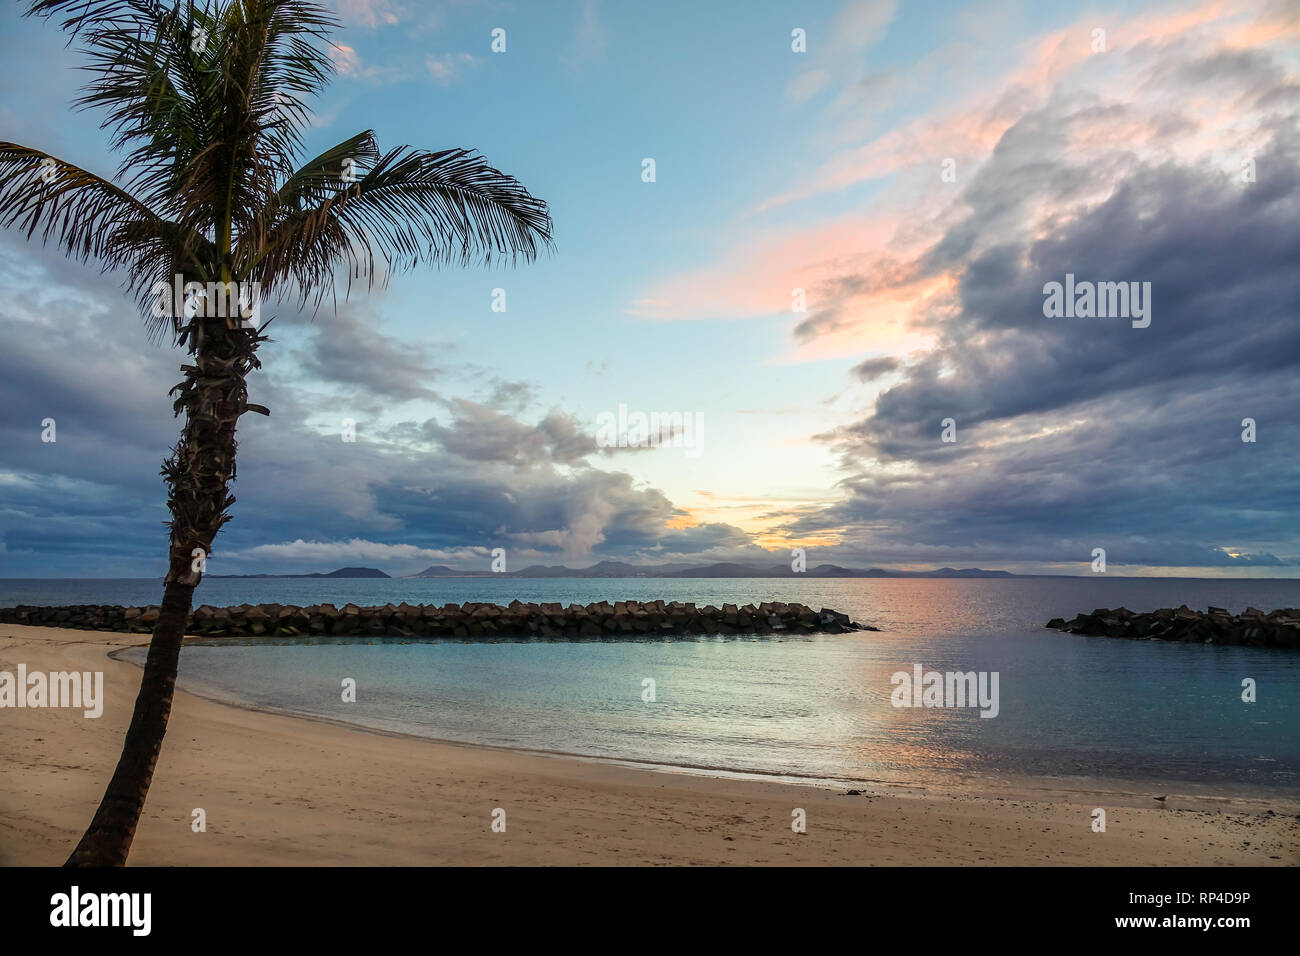 Beach and palm tree in sunset. Stormy dark clouds in the background. Stock Photo